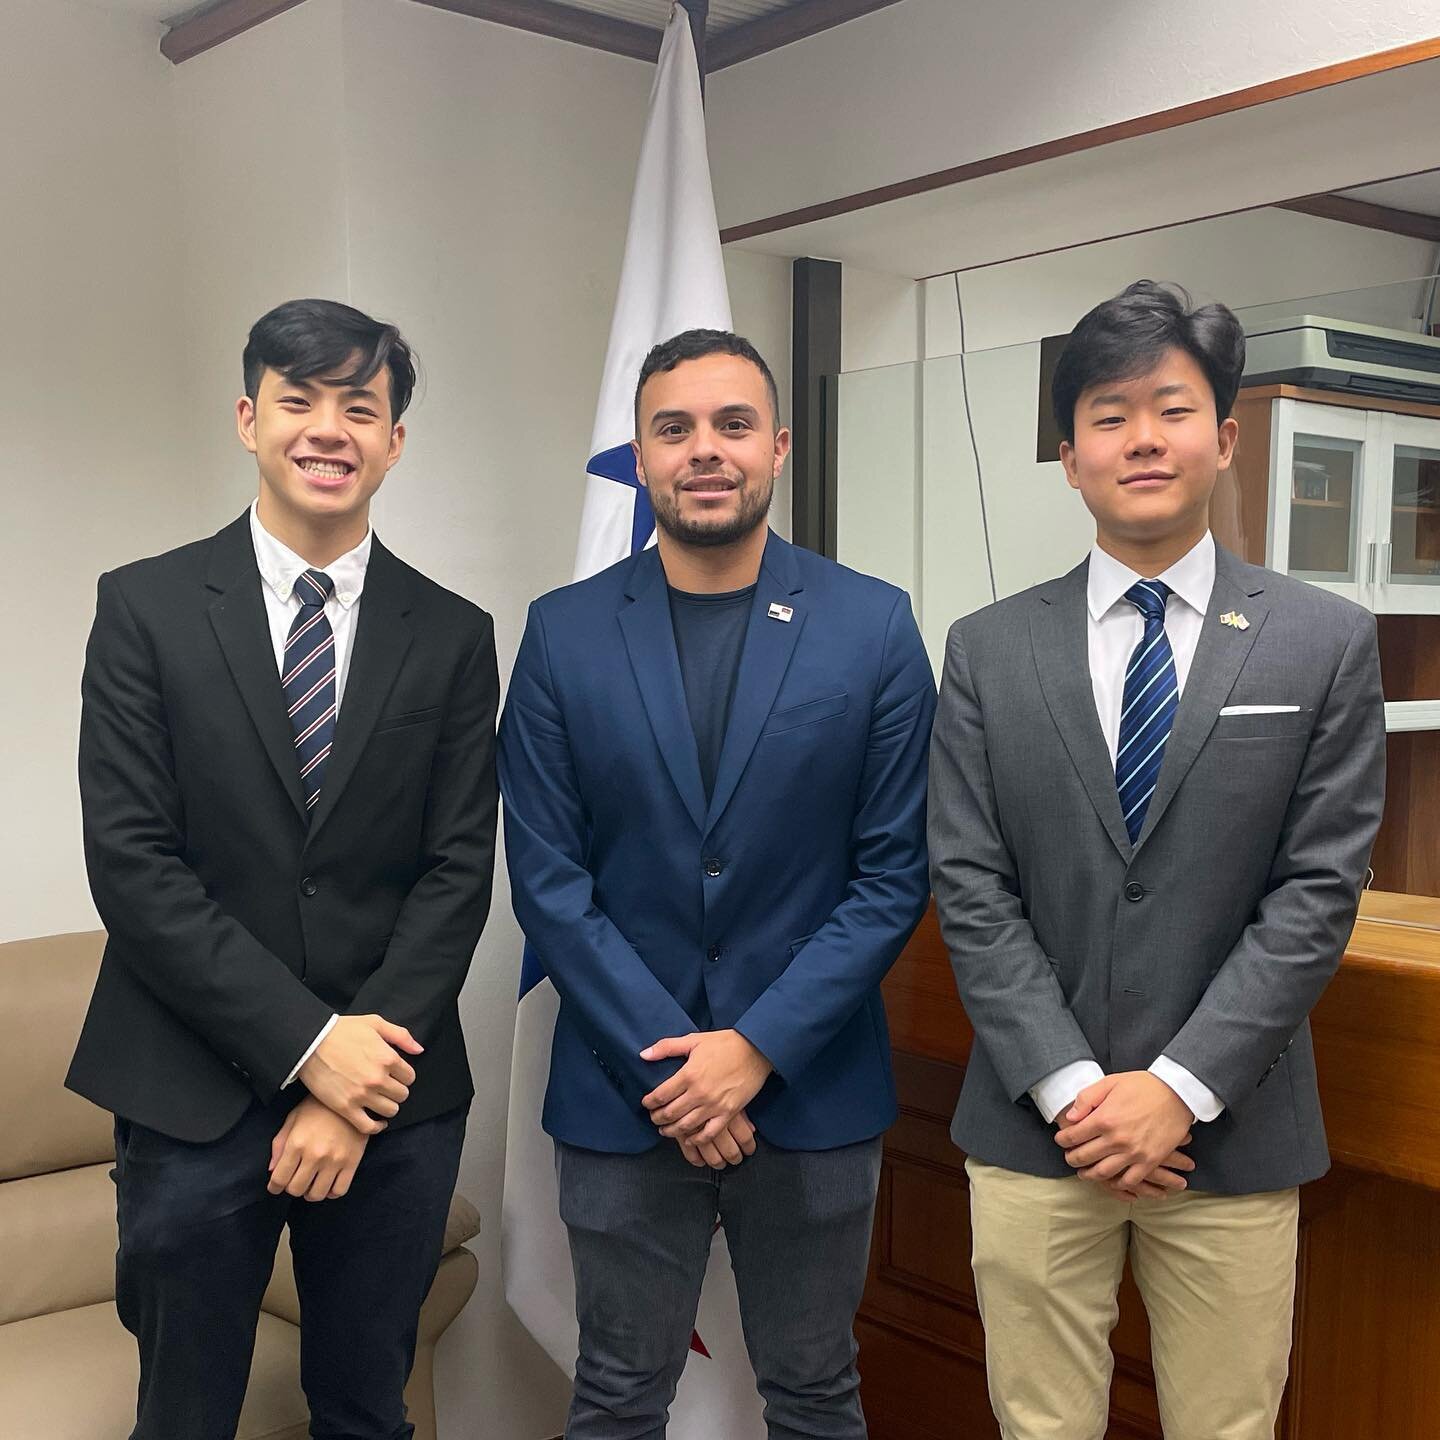 Consulate General of the Republic of Panama 🇵🇦

Room 1008, Wing on Centre, 111 Connaught Road, Sheung Wan, Hong Kong

Today we met with Consul General of Panama Jaime Campuzano at the Panamanian Consulate in Sheung Wan. As we enjoyed our meeting la